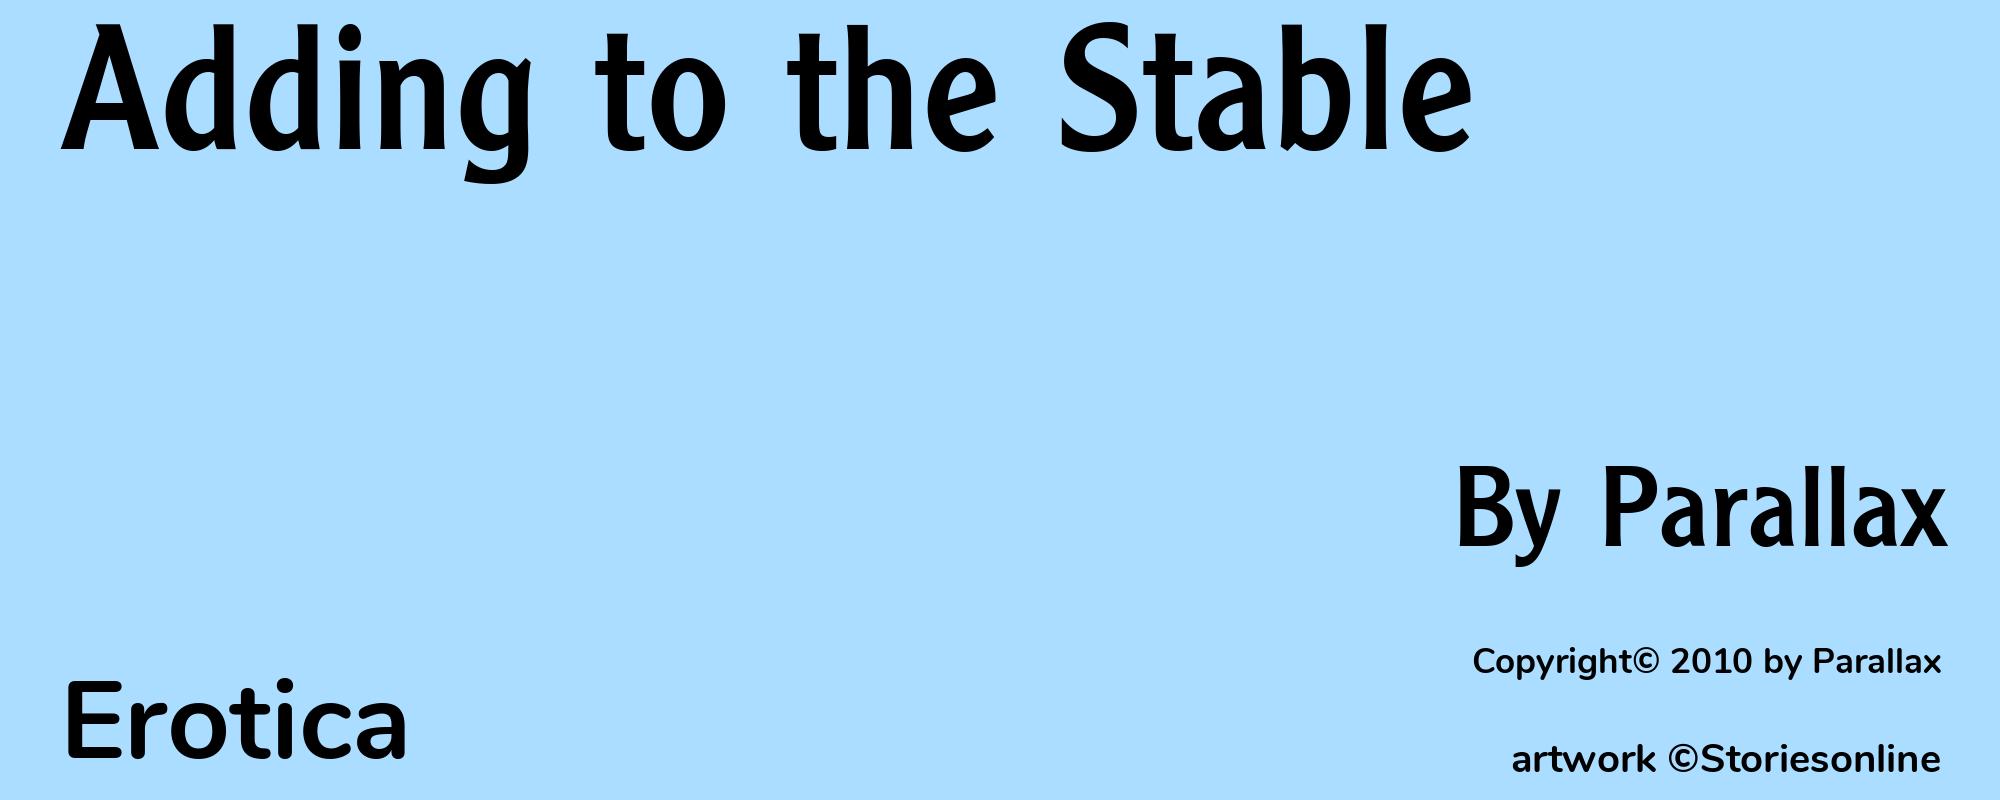 Adding to the Stable - Cover